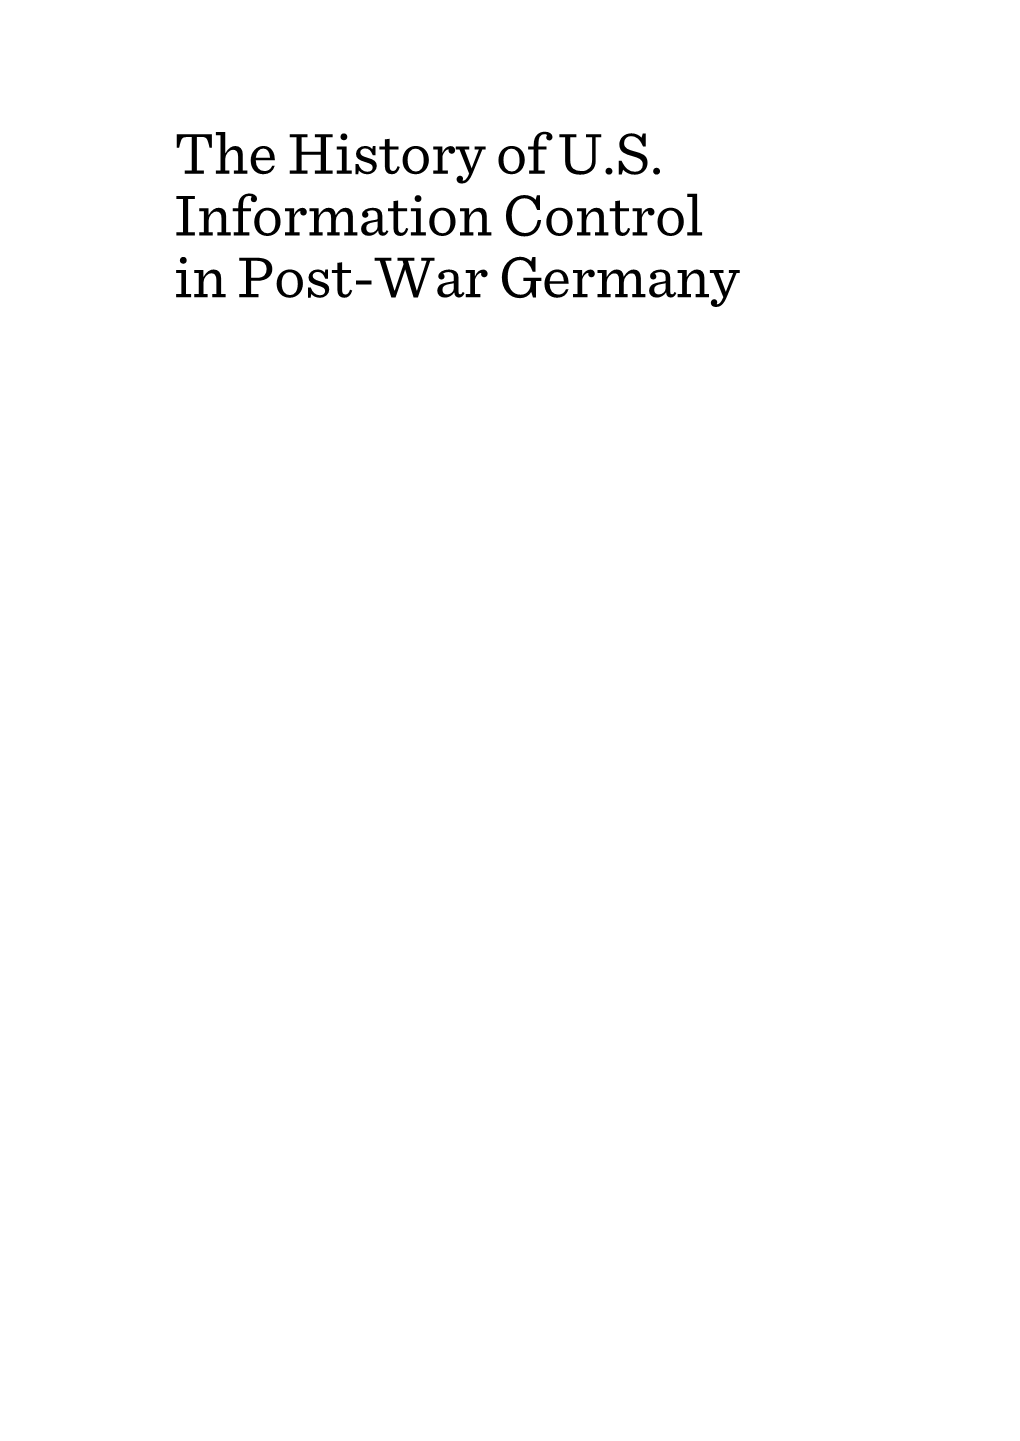 The History of U.S. Information Control in Post-War Germany